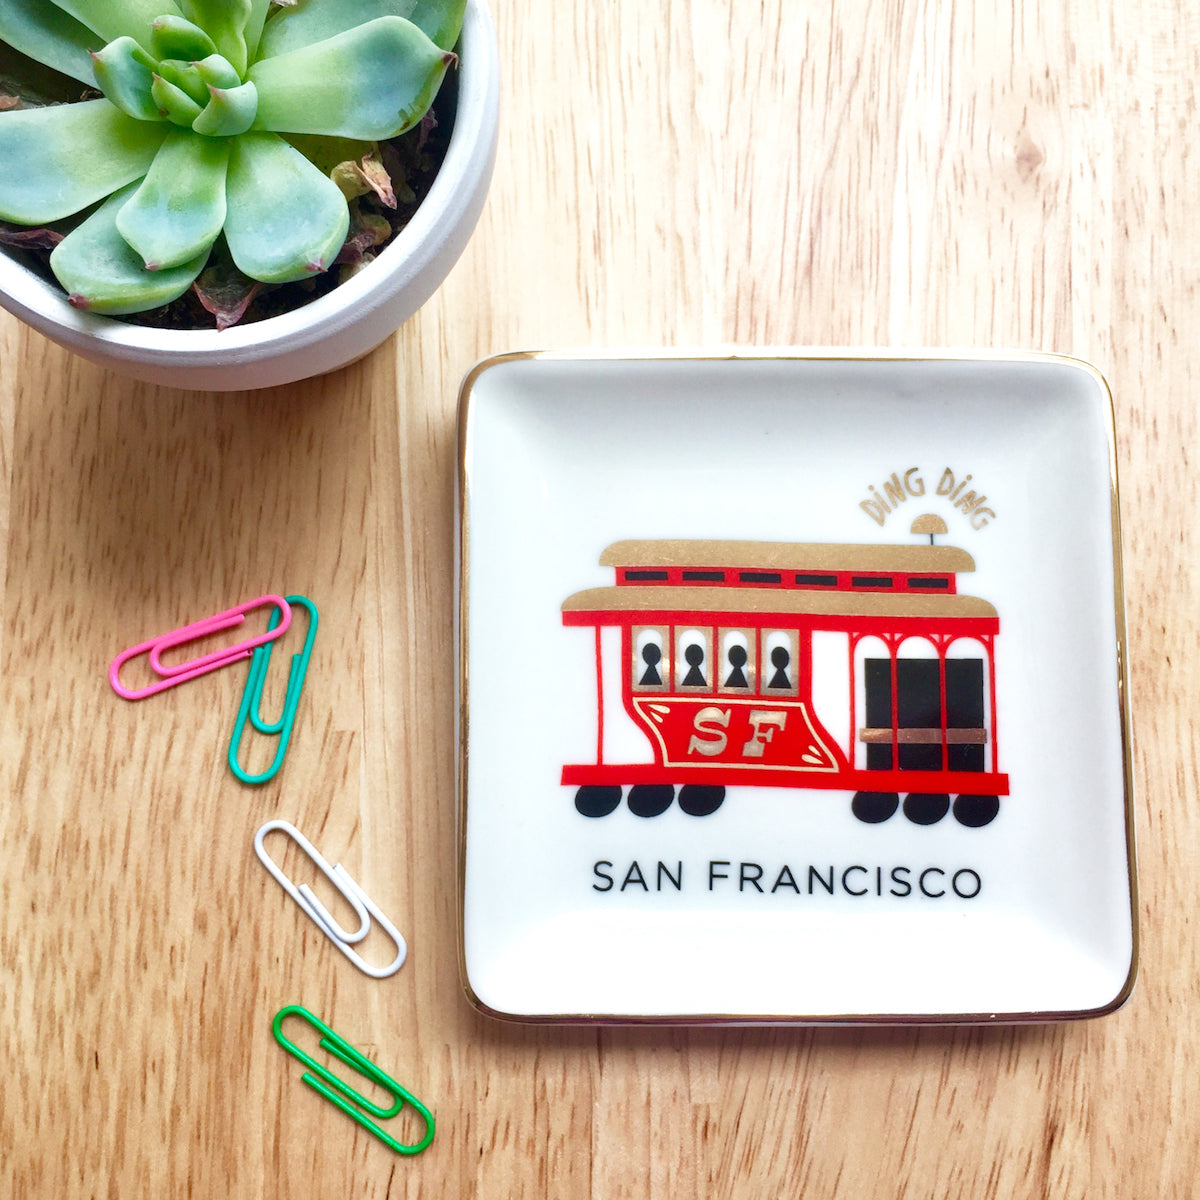 A small succulent, colorful paperclips, and square ceramic dish with a colorful illustration of a San Francisco cable car and gold accents sit on a wooden table top.